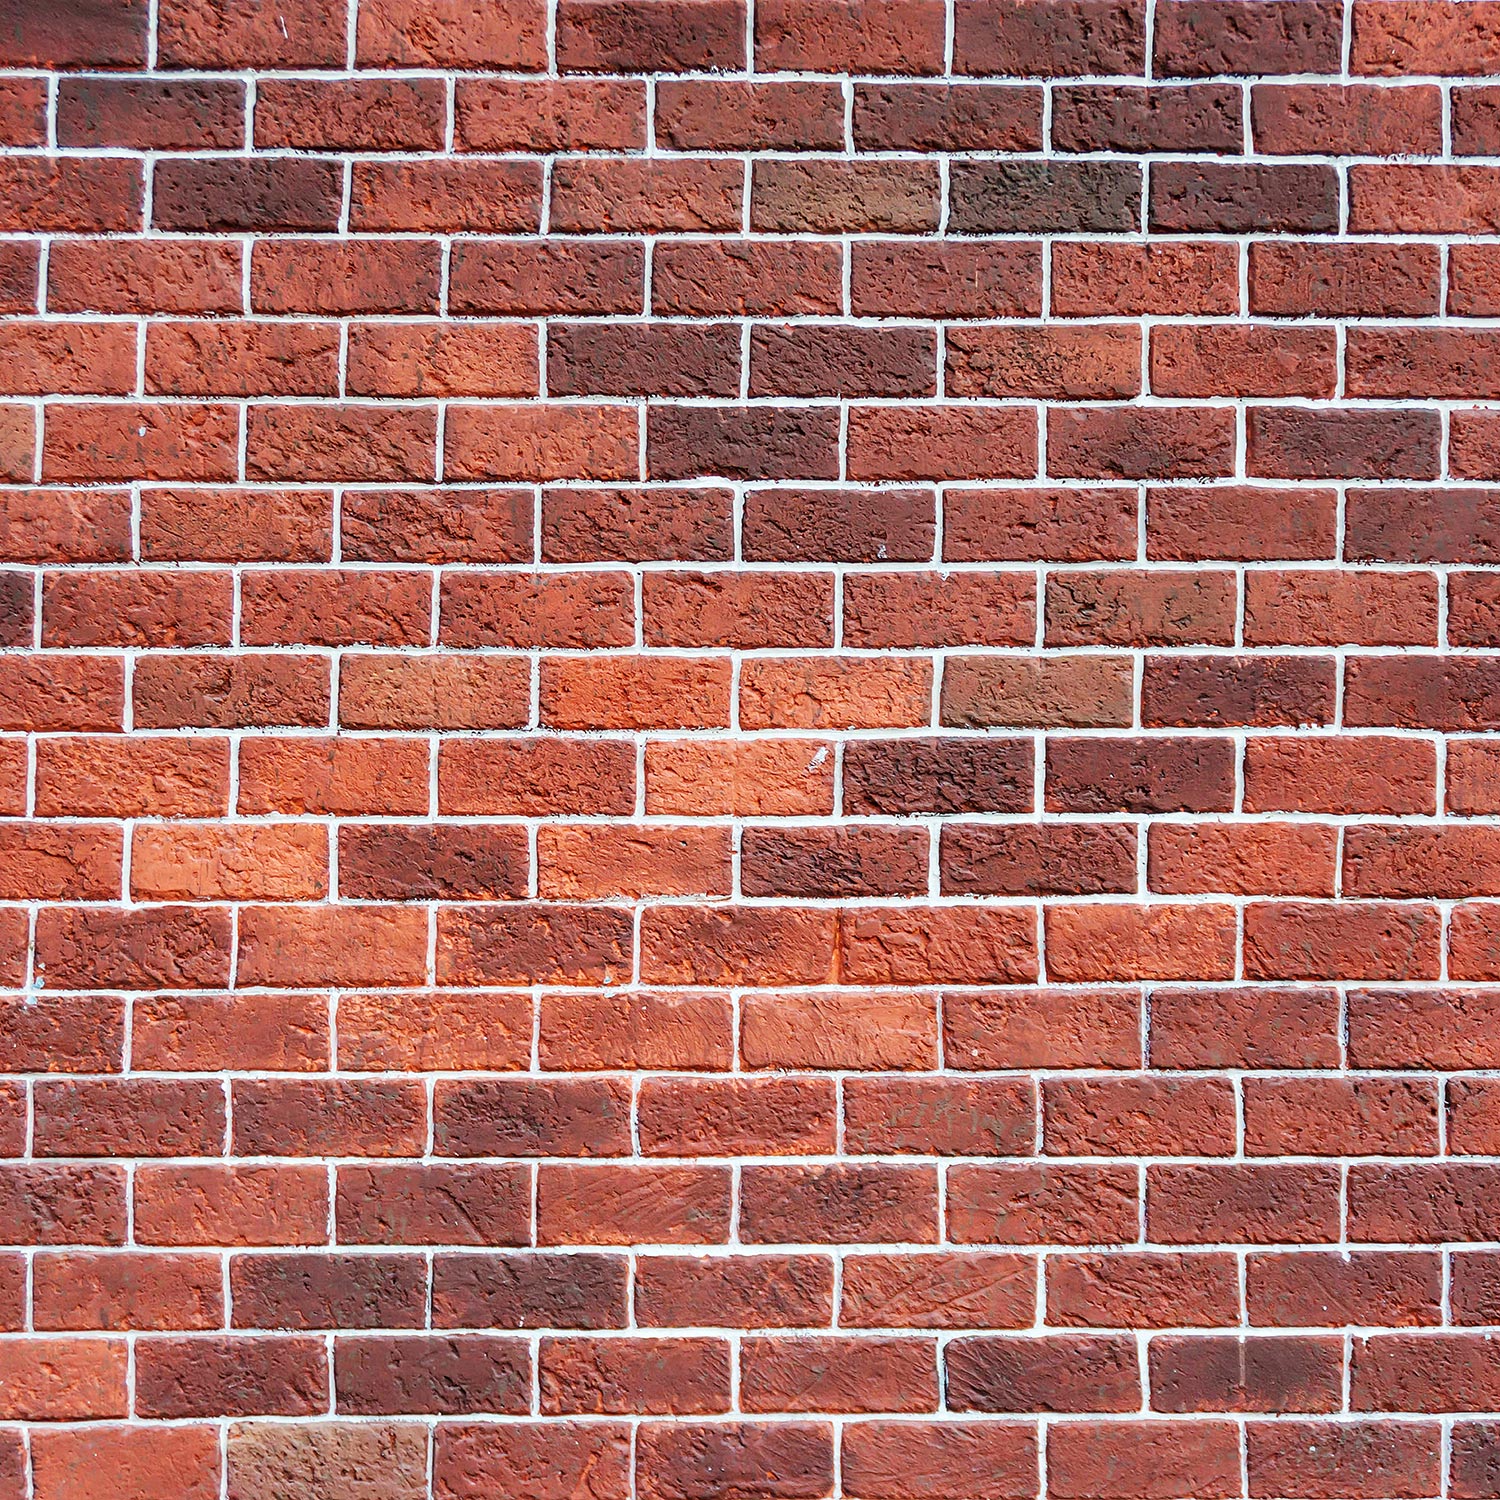 🔥 Free download Elegant Brick Wall Picture Red Wallpaper For Decor